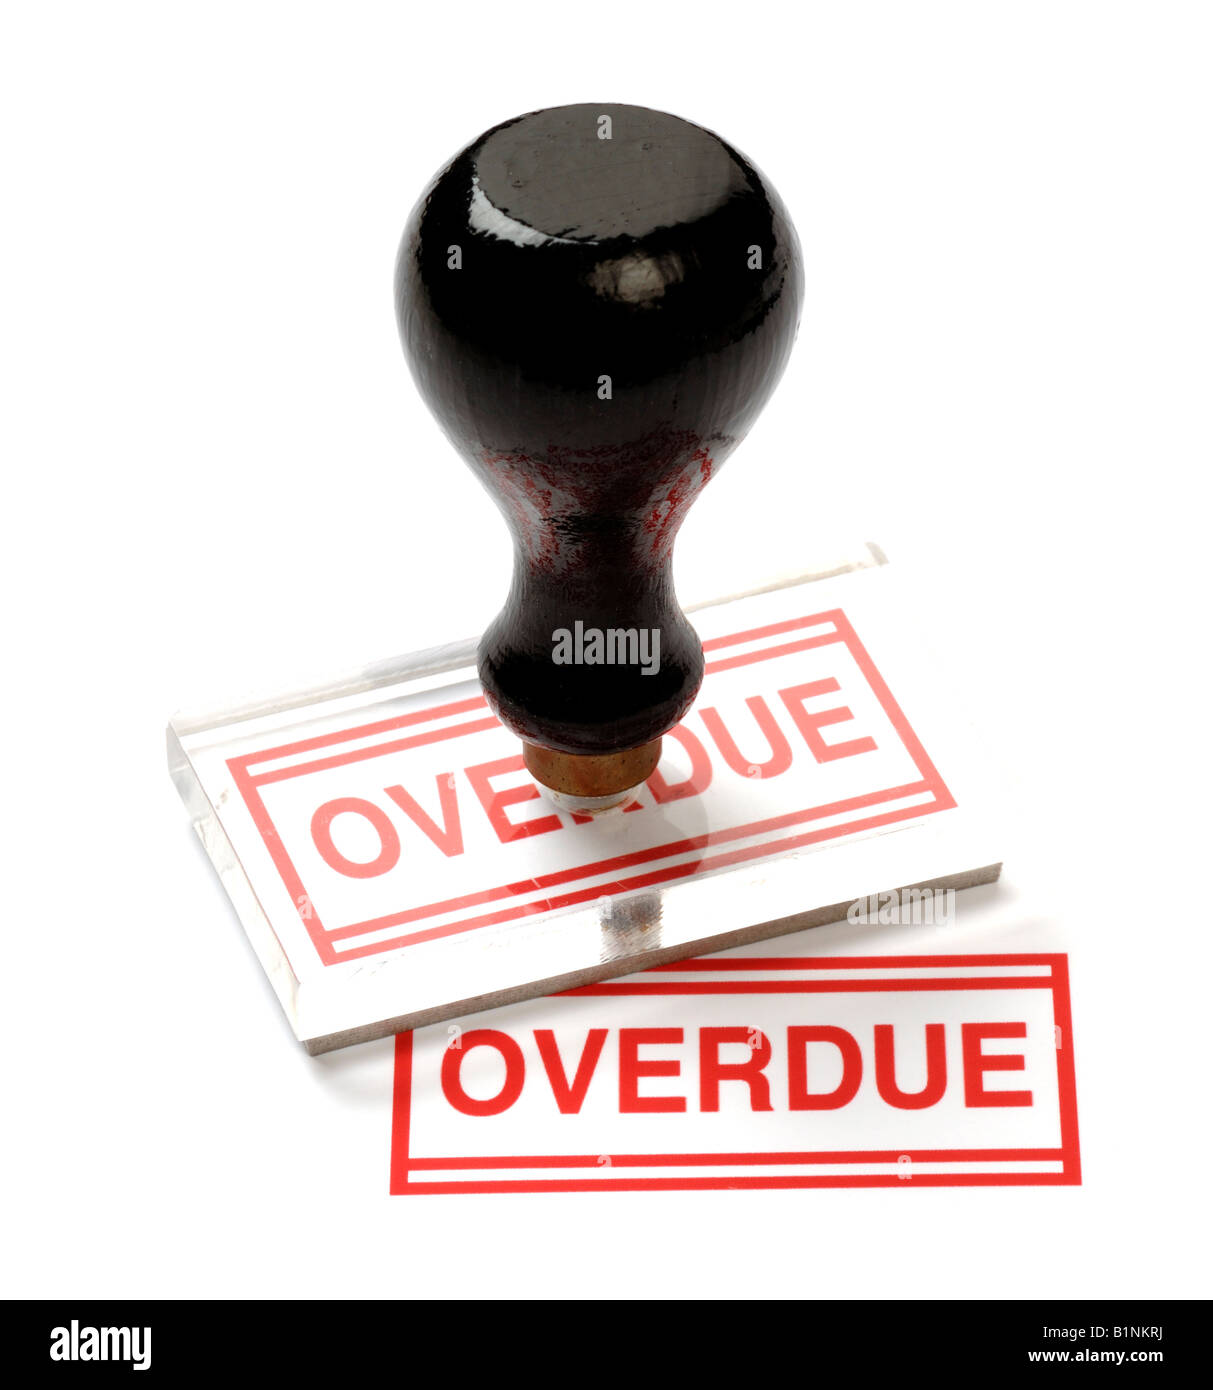 Overdue office rubber stamp Stock Photo